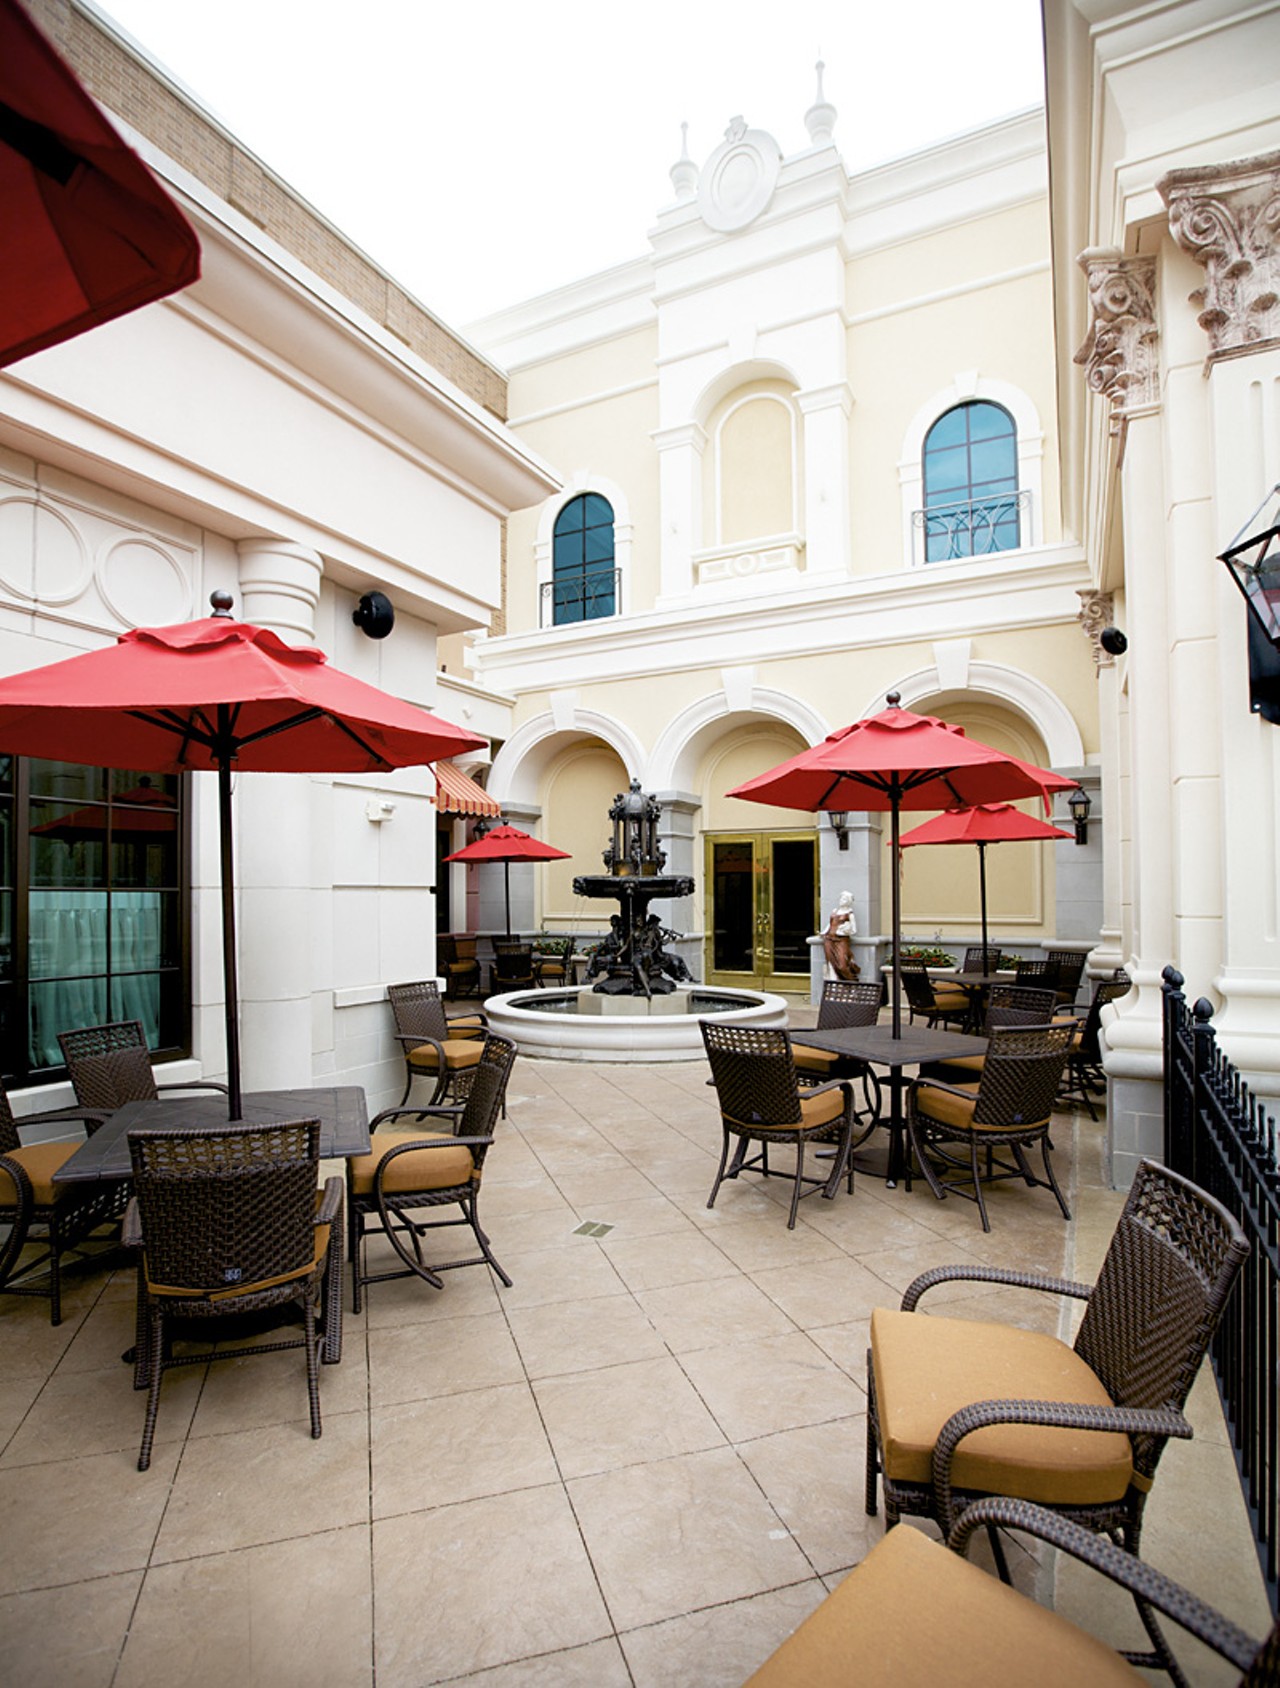 The oudoor patio seating offers a change of scenery from the casino's atmosphere.